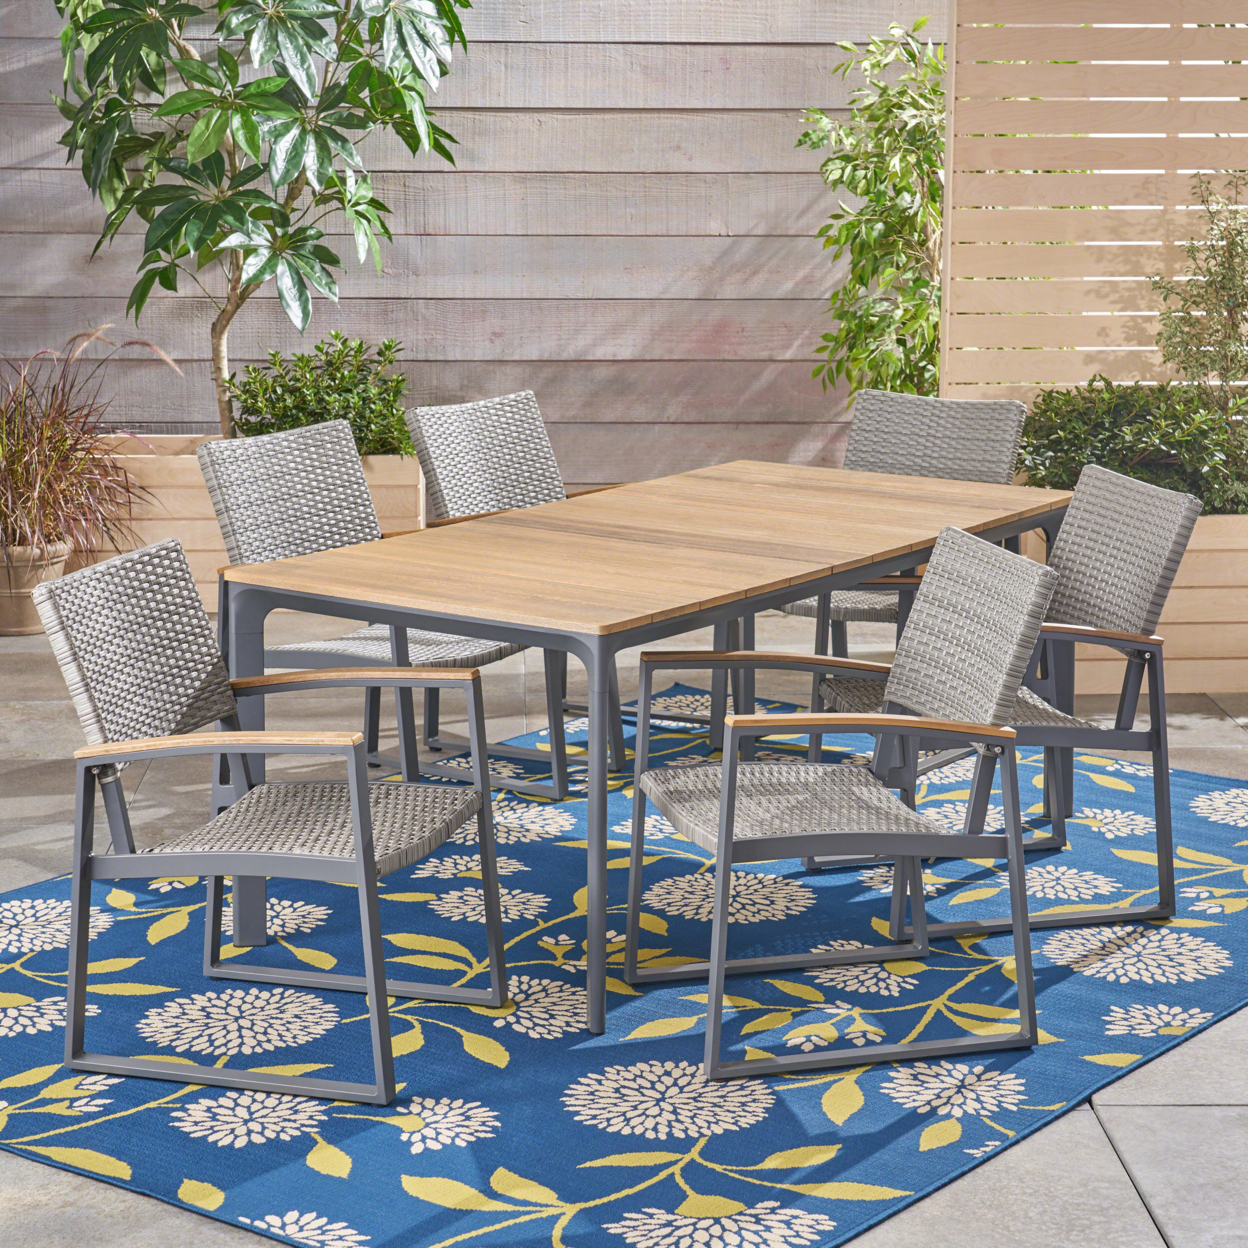 Buster Outdoor 7 Piece Aluminum And Mesh Dining Set With Wood Top - Wicker